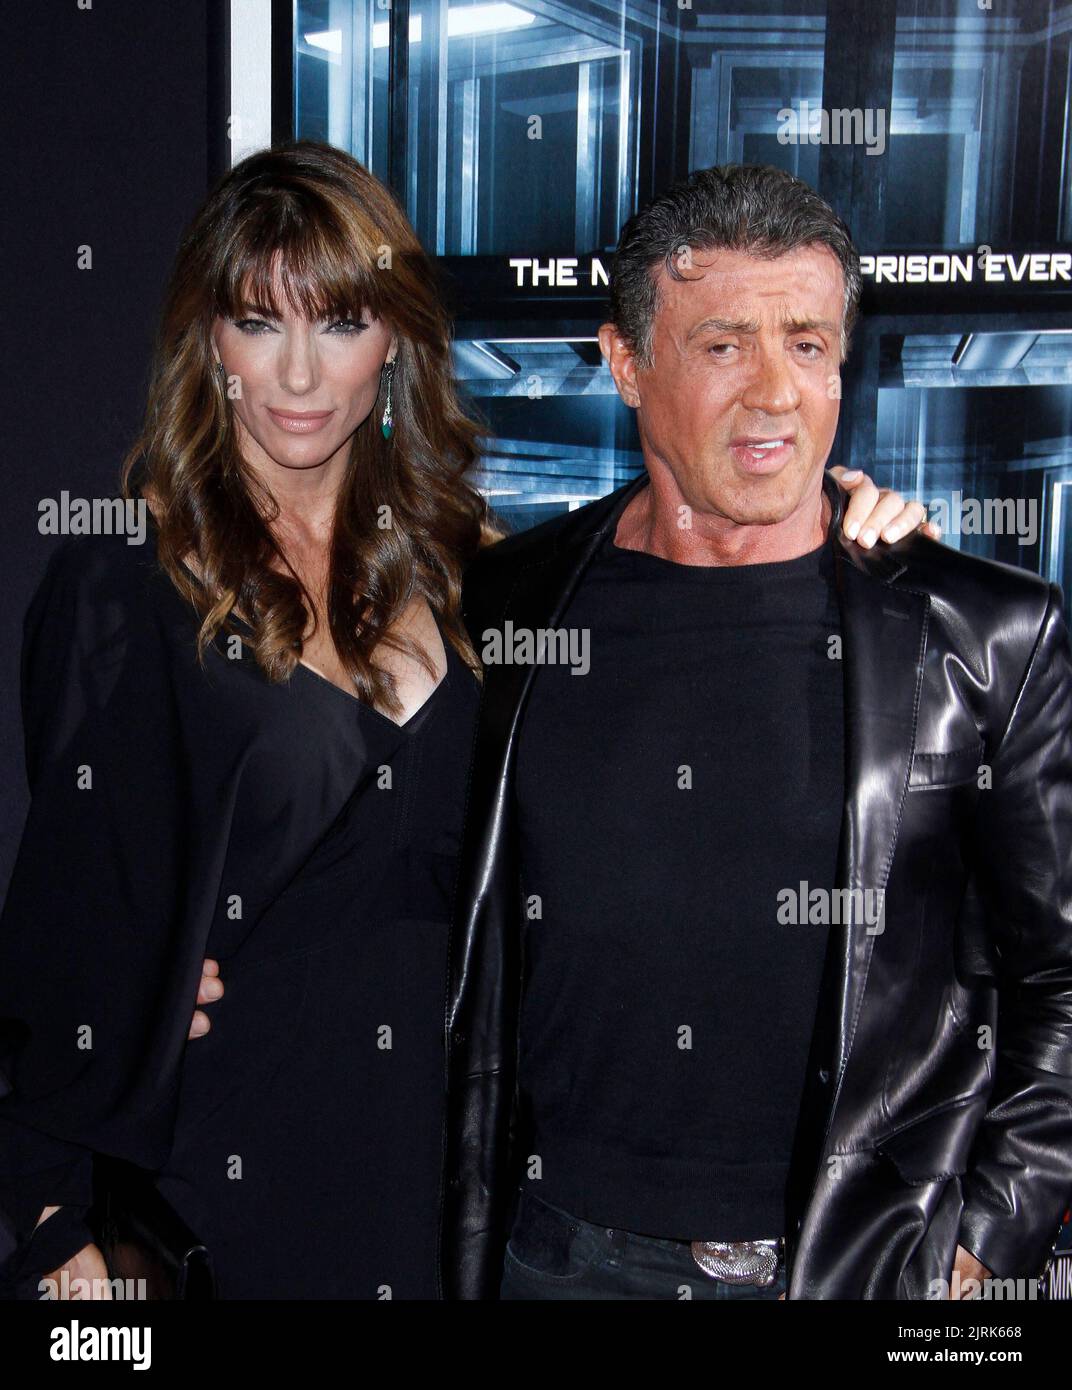 File photo dated October 15, 2013 of Jennifer Flavin and Sylvester Stallone attend the 'Escape Plan' screening at the Regal Theater on 42nd Street in New York City, NY, USA. Sylvester Stallone and Jennifer Flavin are divorcing after 25 years of marriage. Flavin filed a petition 'for dissolution of marriage and other relief' from the Rocky actor, 76, on Friday at a court in Palm Beach County, Florida. Stallone and Flavin, 54, married in 1997, though their relationship originally began in 1988 at a restaurant in Beverly Hills, California. Photo by Donna Ward/ABACAPRESS.COM Stock Photo